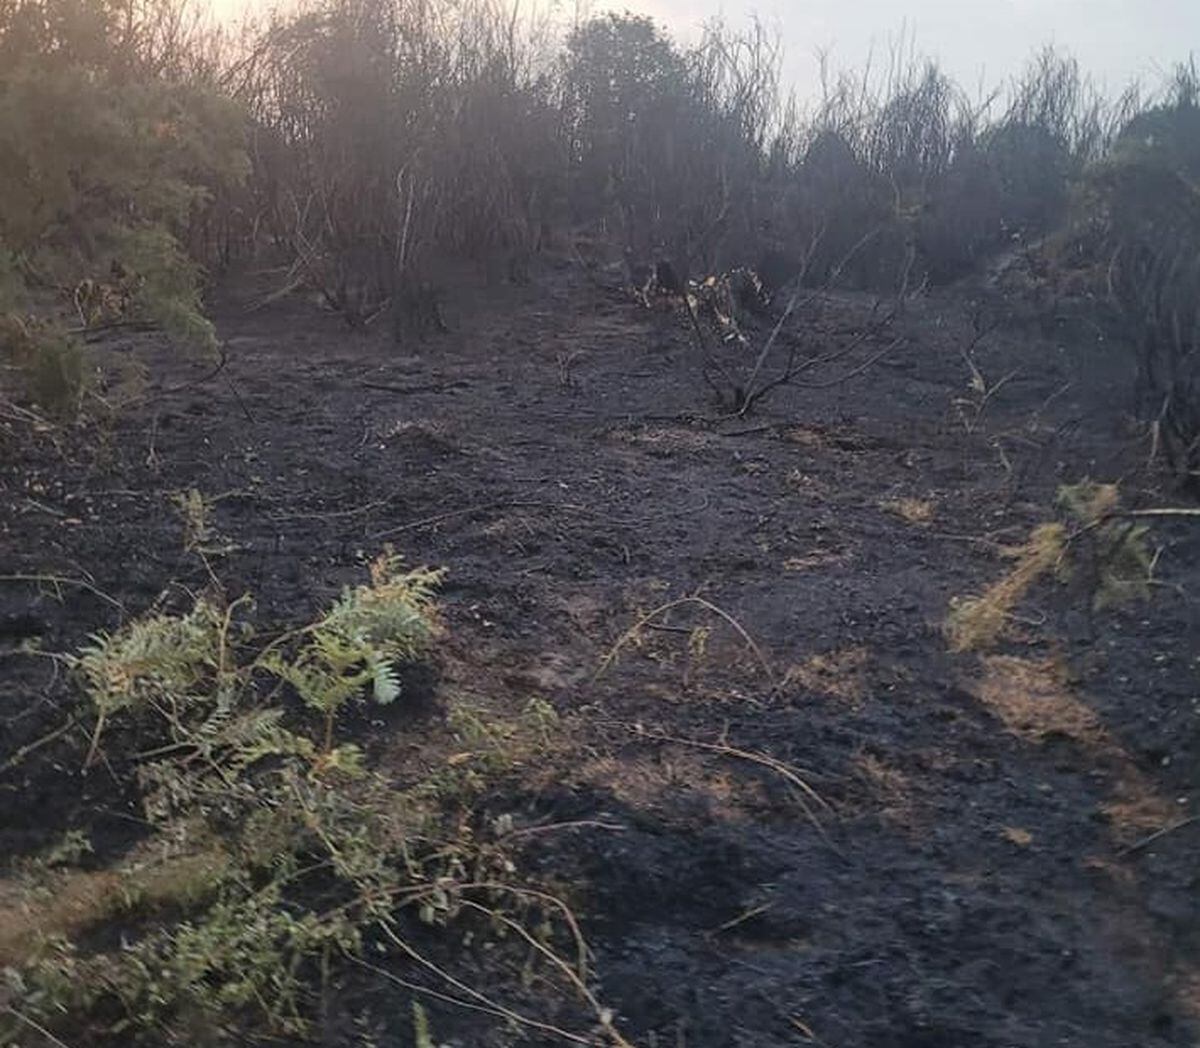 The aftermath of the fire on Hartlebury Common. Photo: Hereford & Worcester Fire and Rescue Service